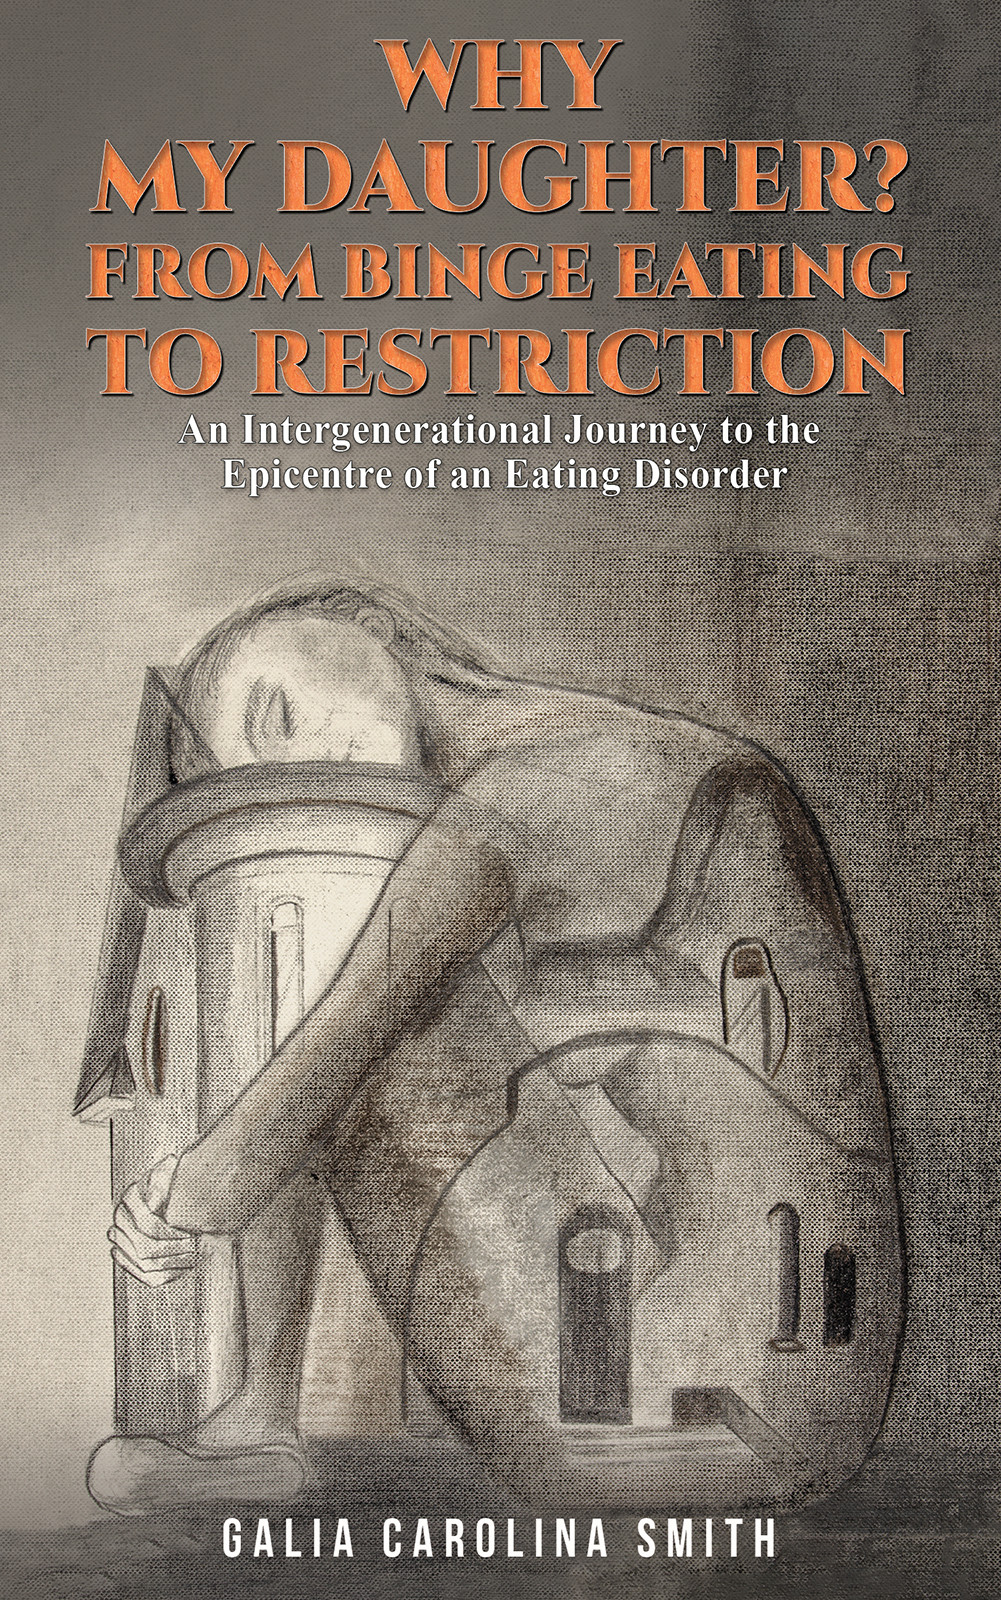 Why My Daughter? From Binge Eating to Restriction-bookcover